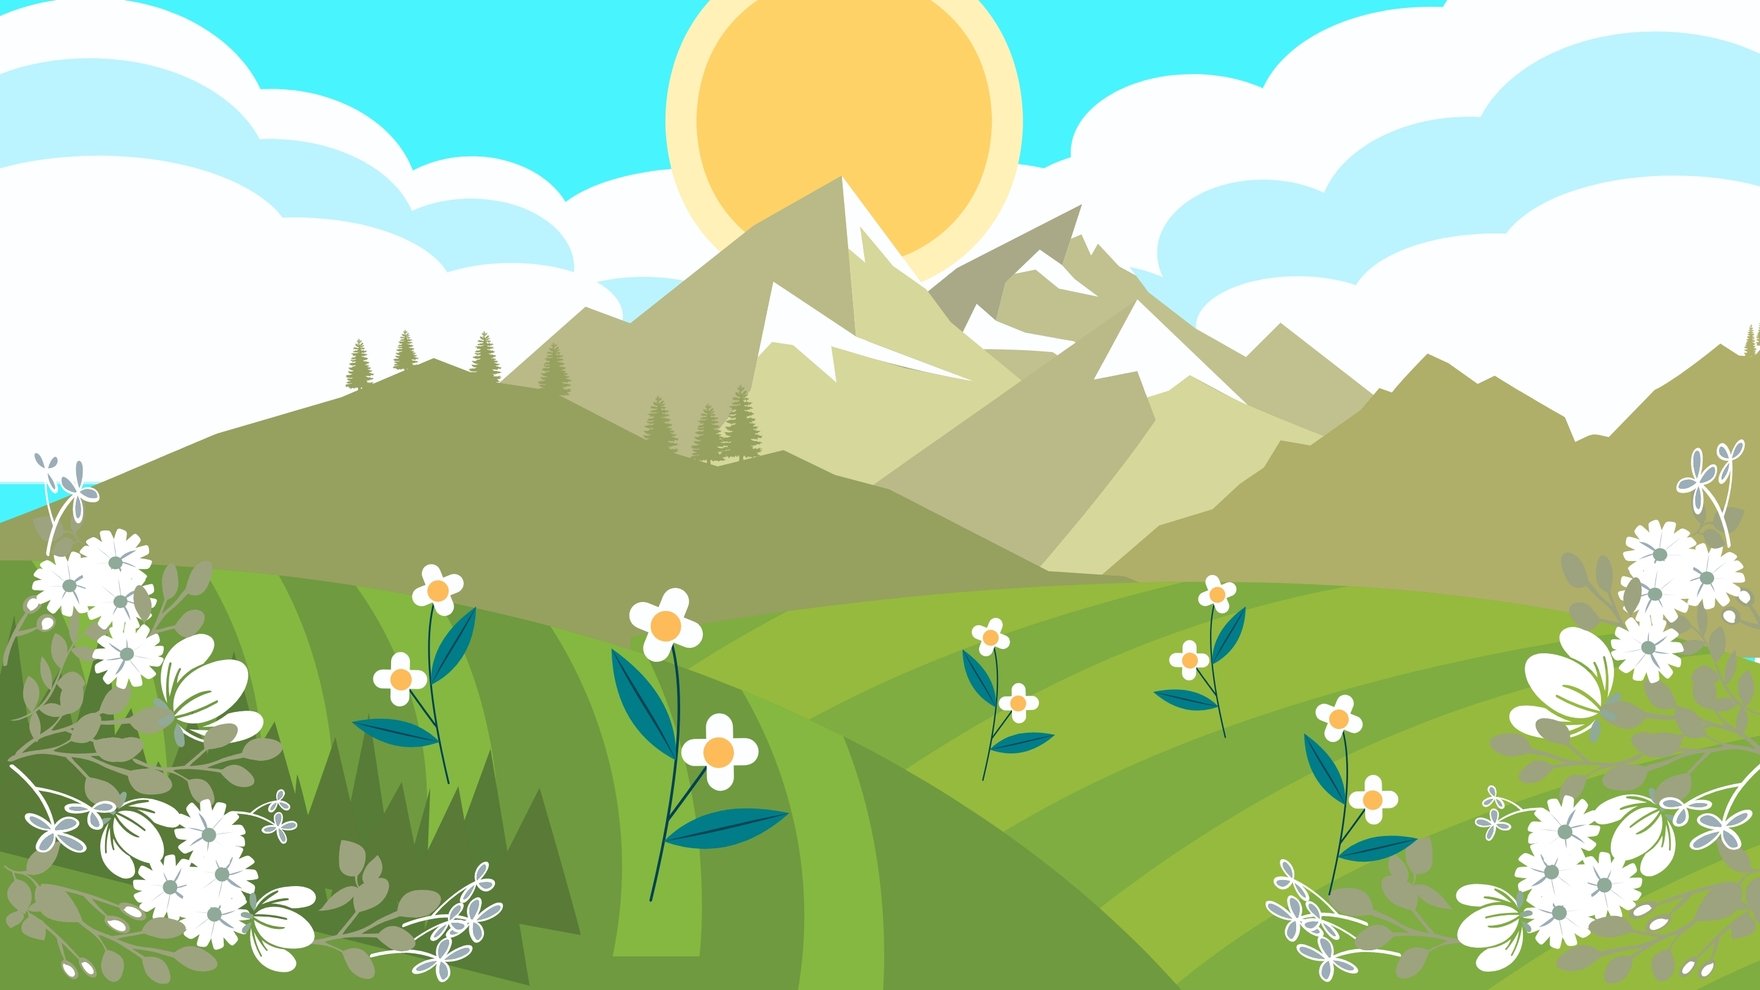 Free Flowers With Mountain Background in Illustrator, EPS, SVG, JPG